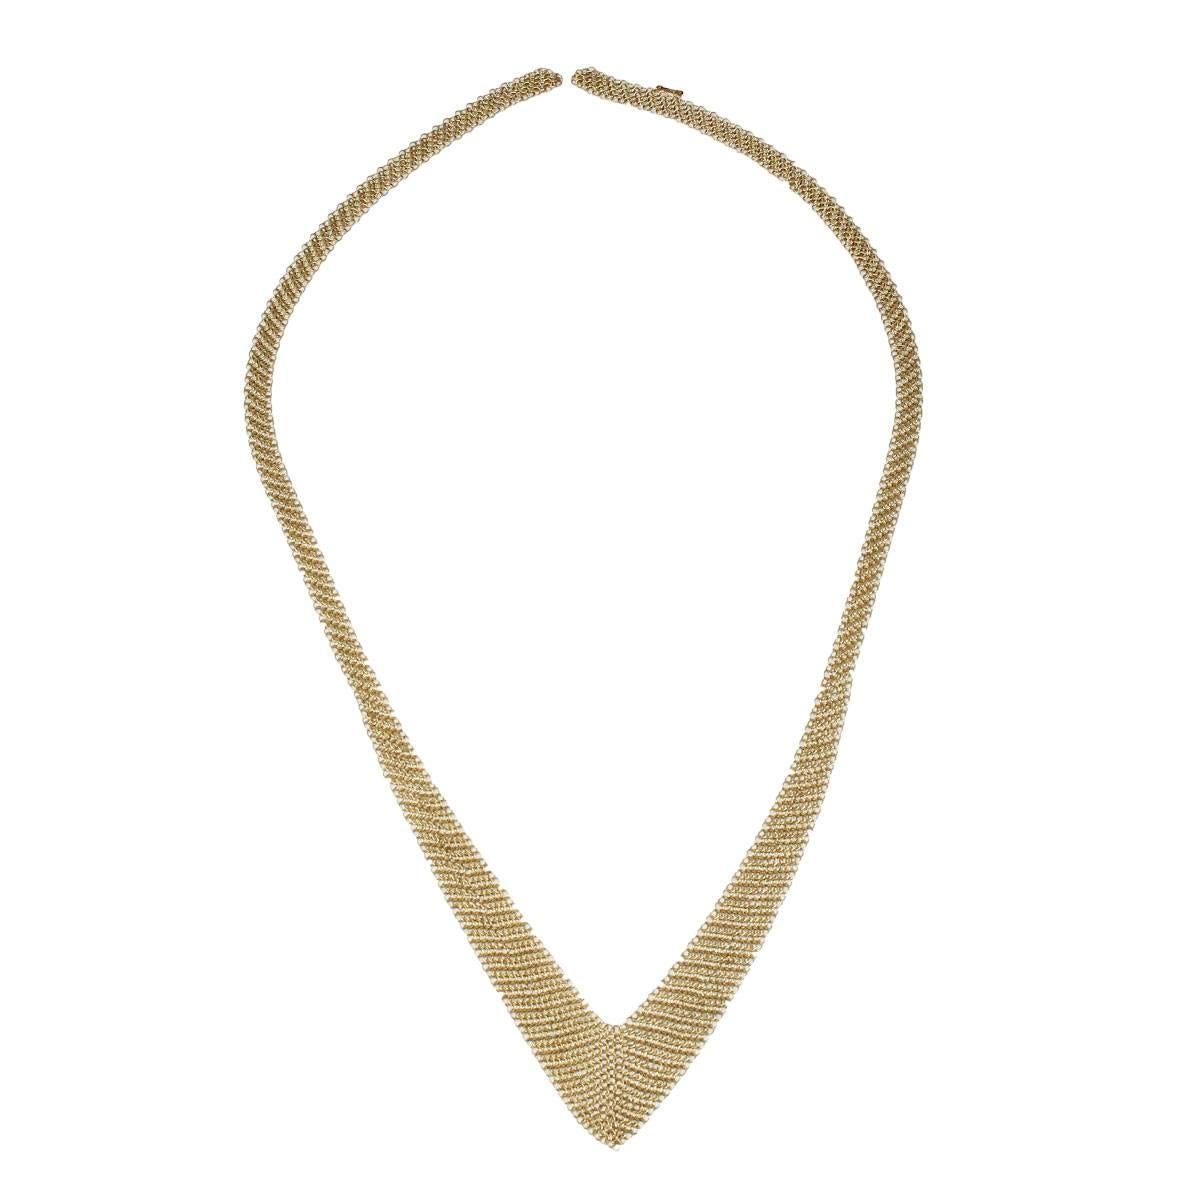 Designer: Tiffany & Co.
Materials: 18k yellow gold
Necklace measurements: 26″ in length
Clasp: Knot
Total Weight: 320g (20.6dwt)
Additional Details: This item comes with a Tiffany & Co. pouch!
SKU: G7007